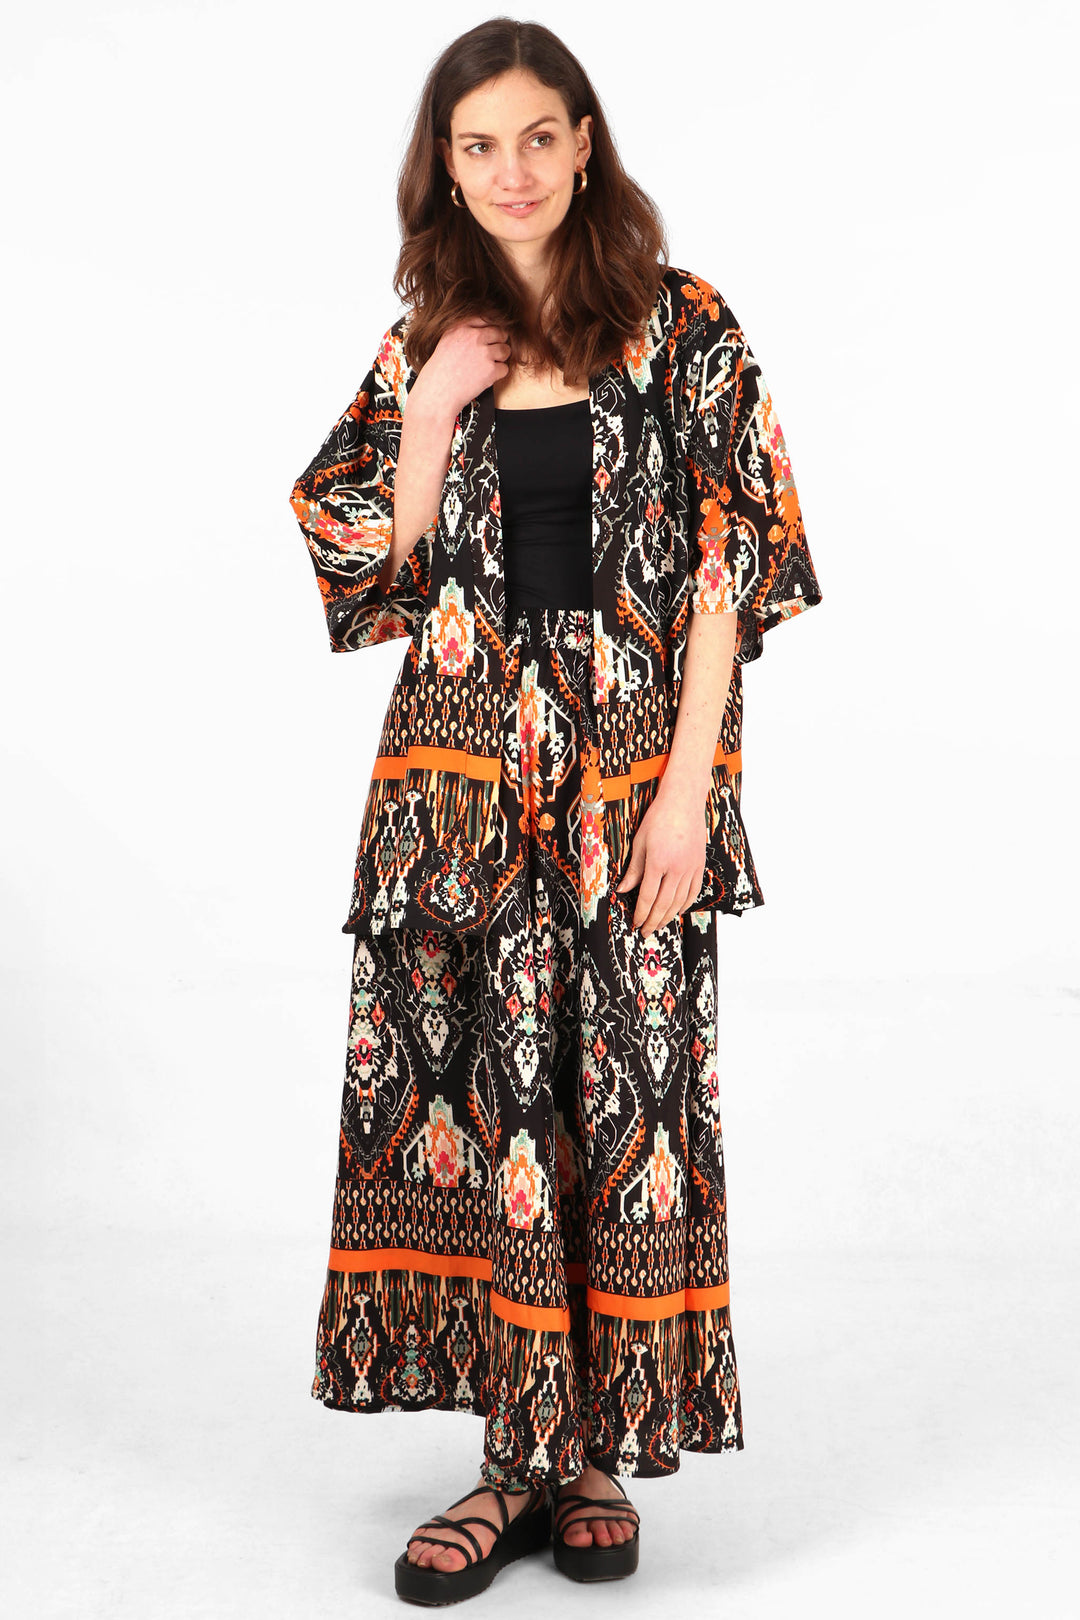 model wearing a black and orange short kimono top with matching palazzo trousers